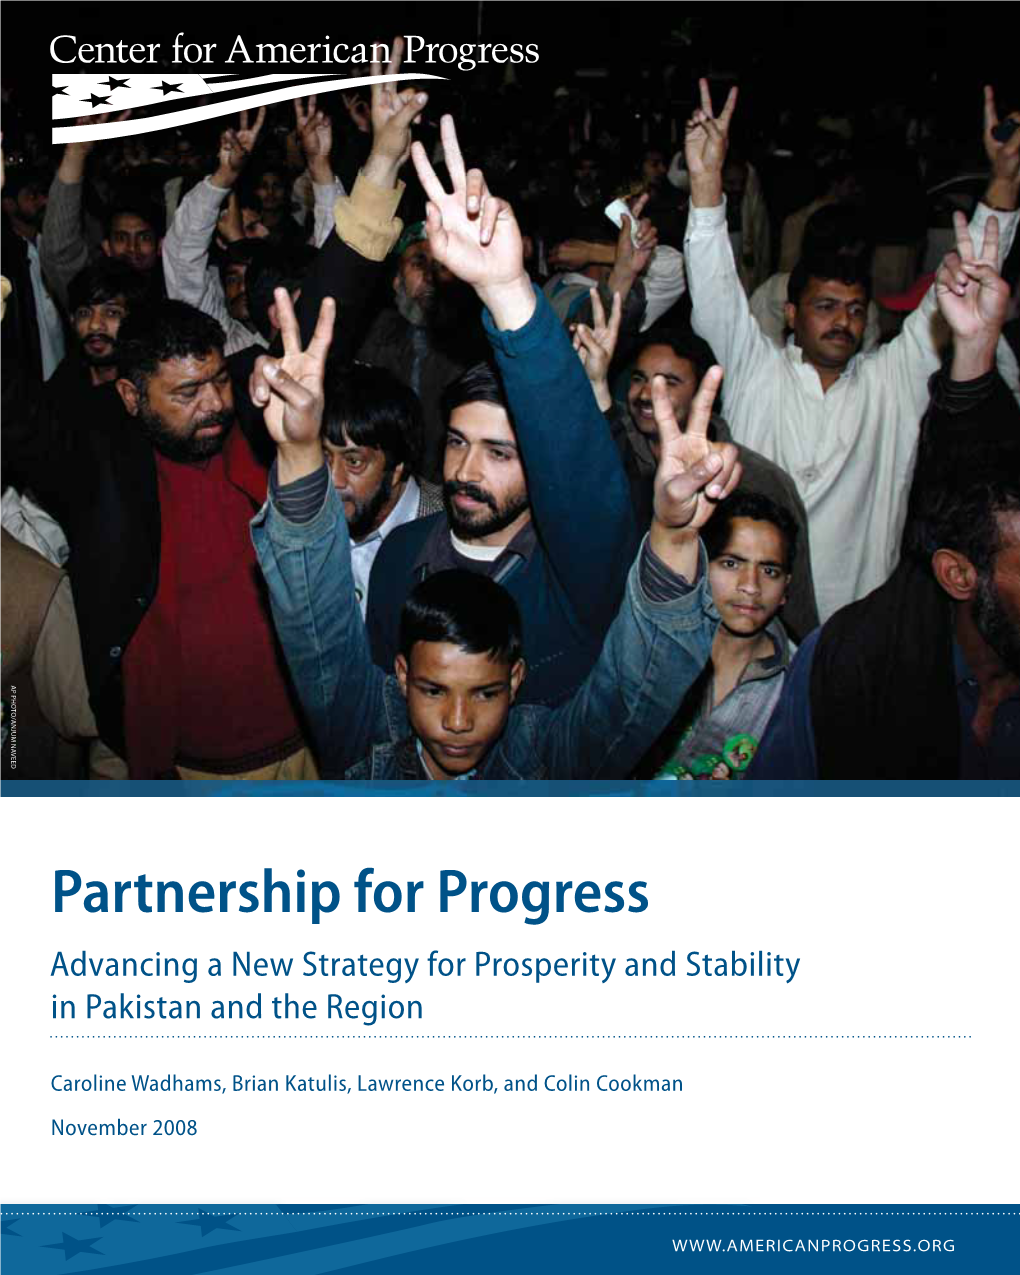 Partnership for Progress Advancing a New Strategy for Prosperity and Stability in Pakistan and the Region